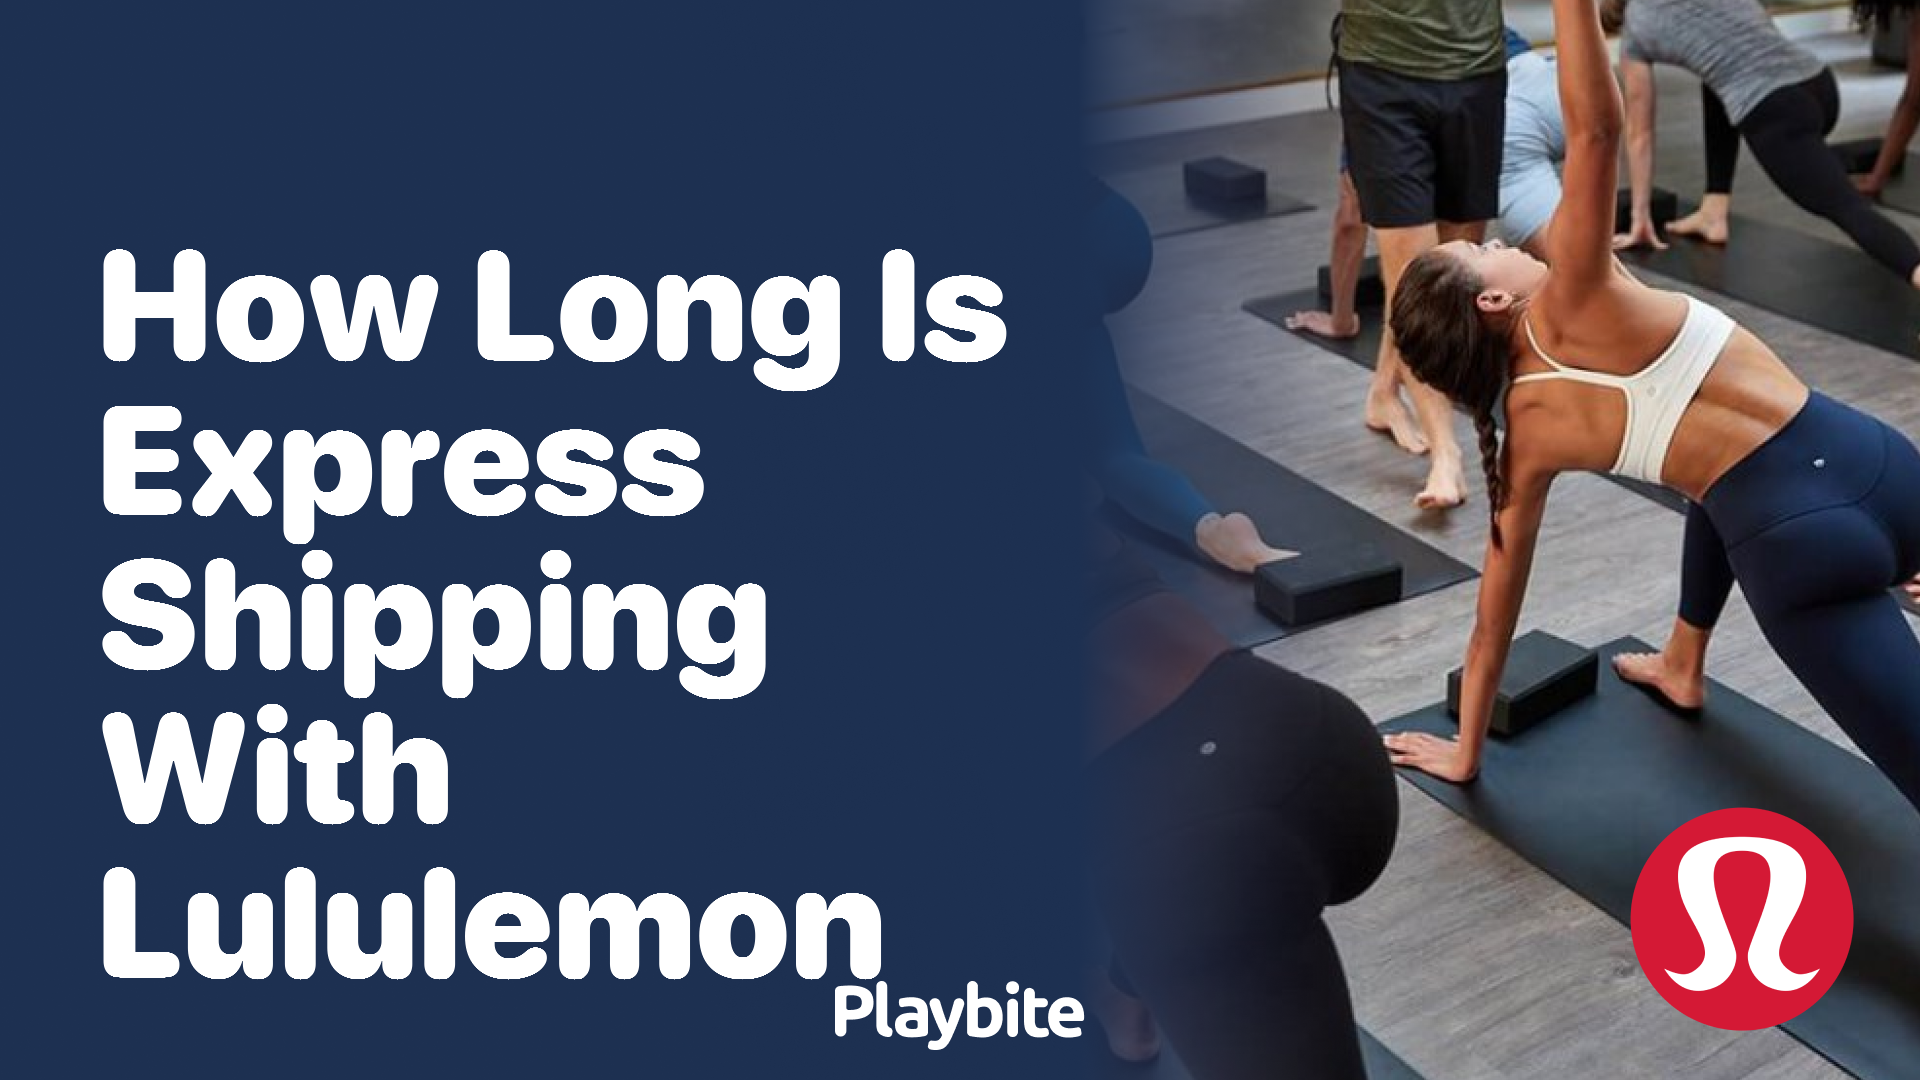 How Long Does Express Shipping Take with Lululemon? - Playbite